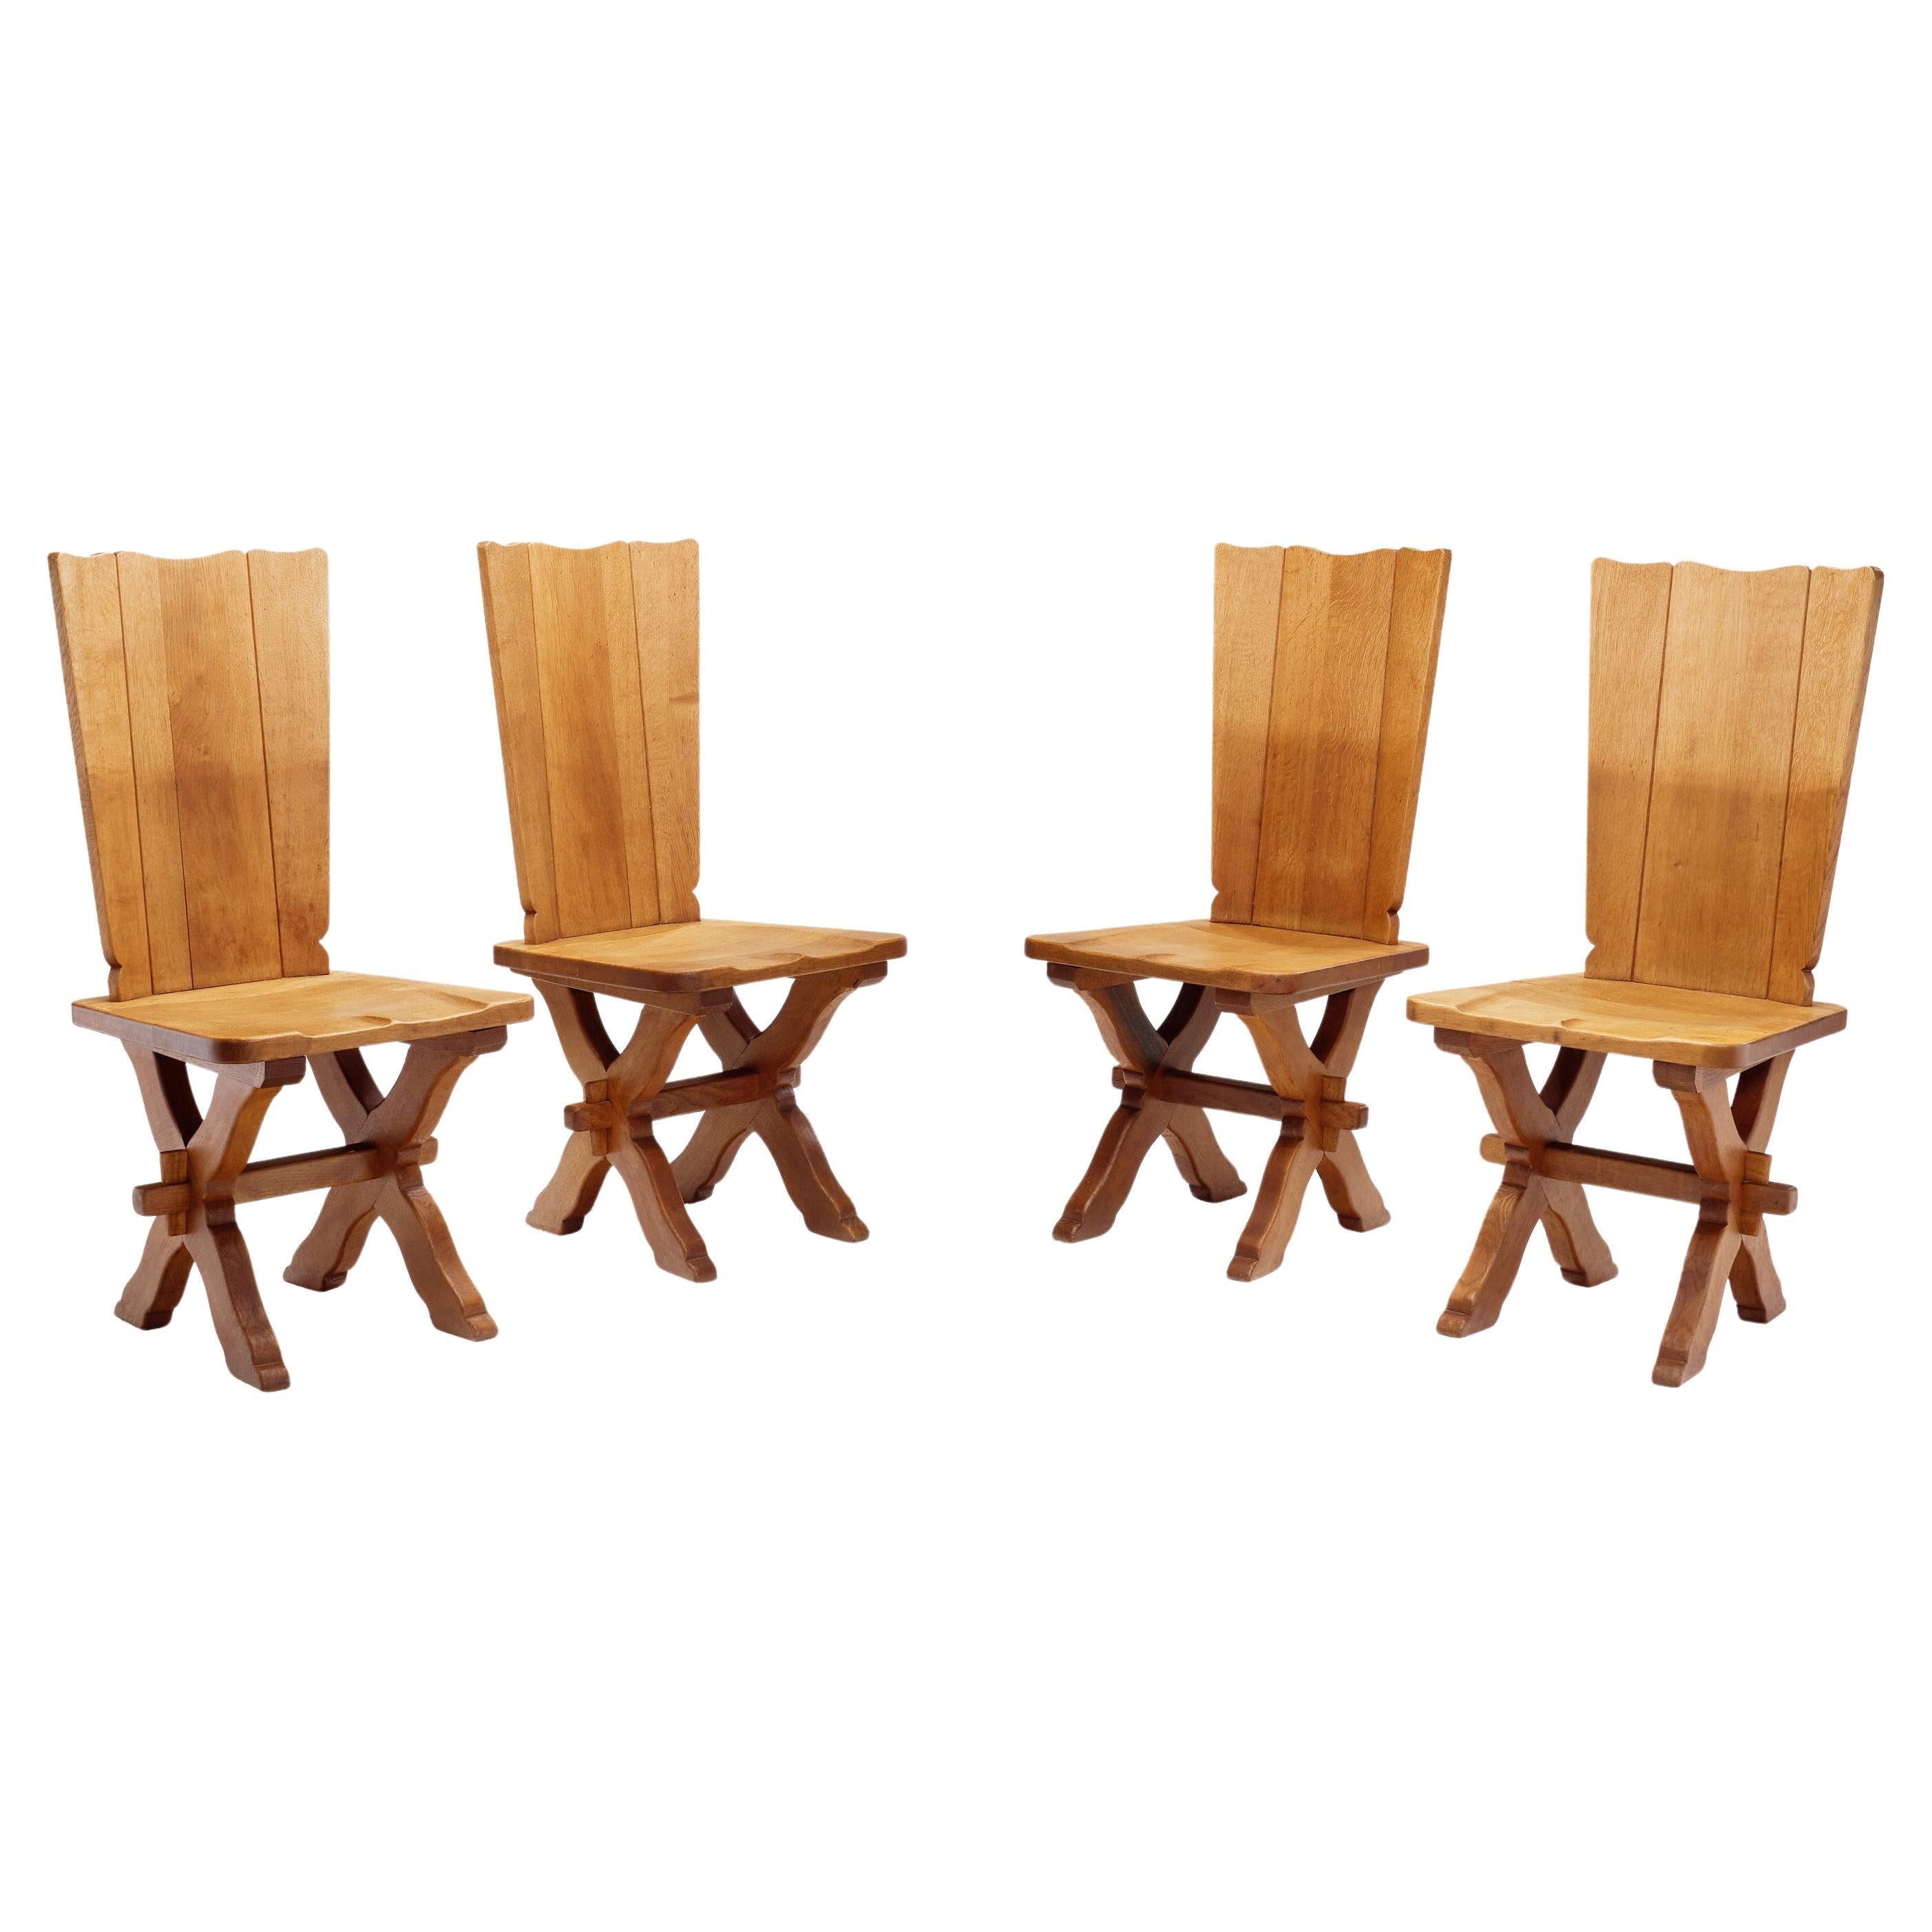 Set of Four Brutalist Oak Dining Chairs, Europe 20th Century For Sale